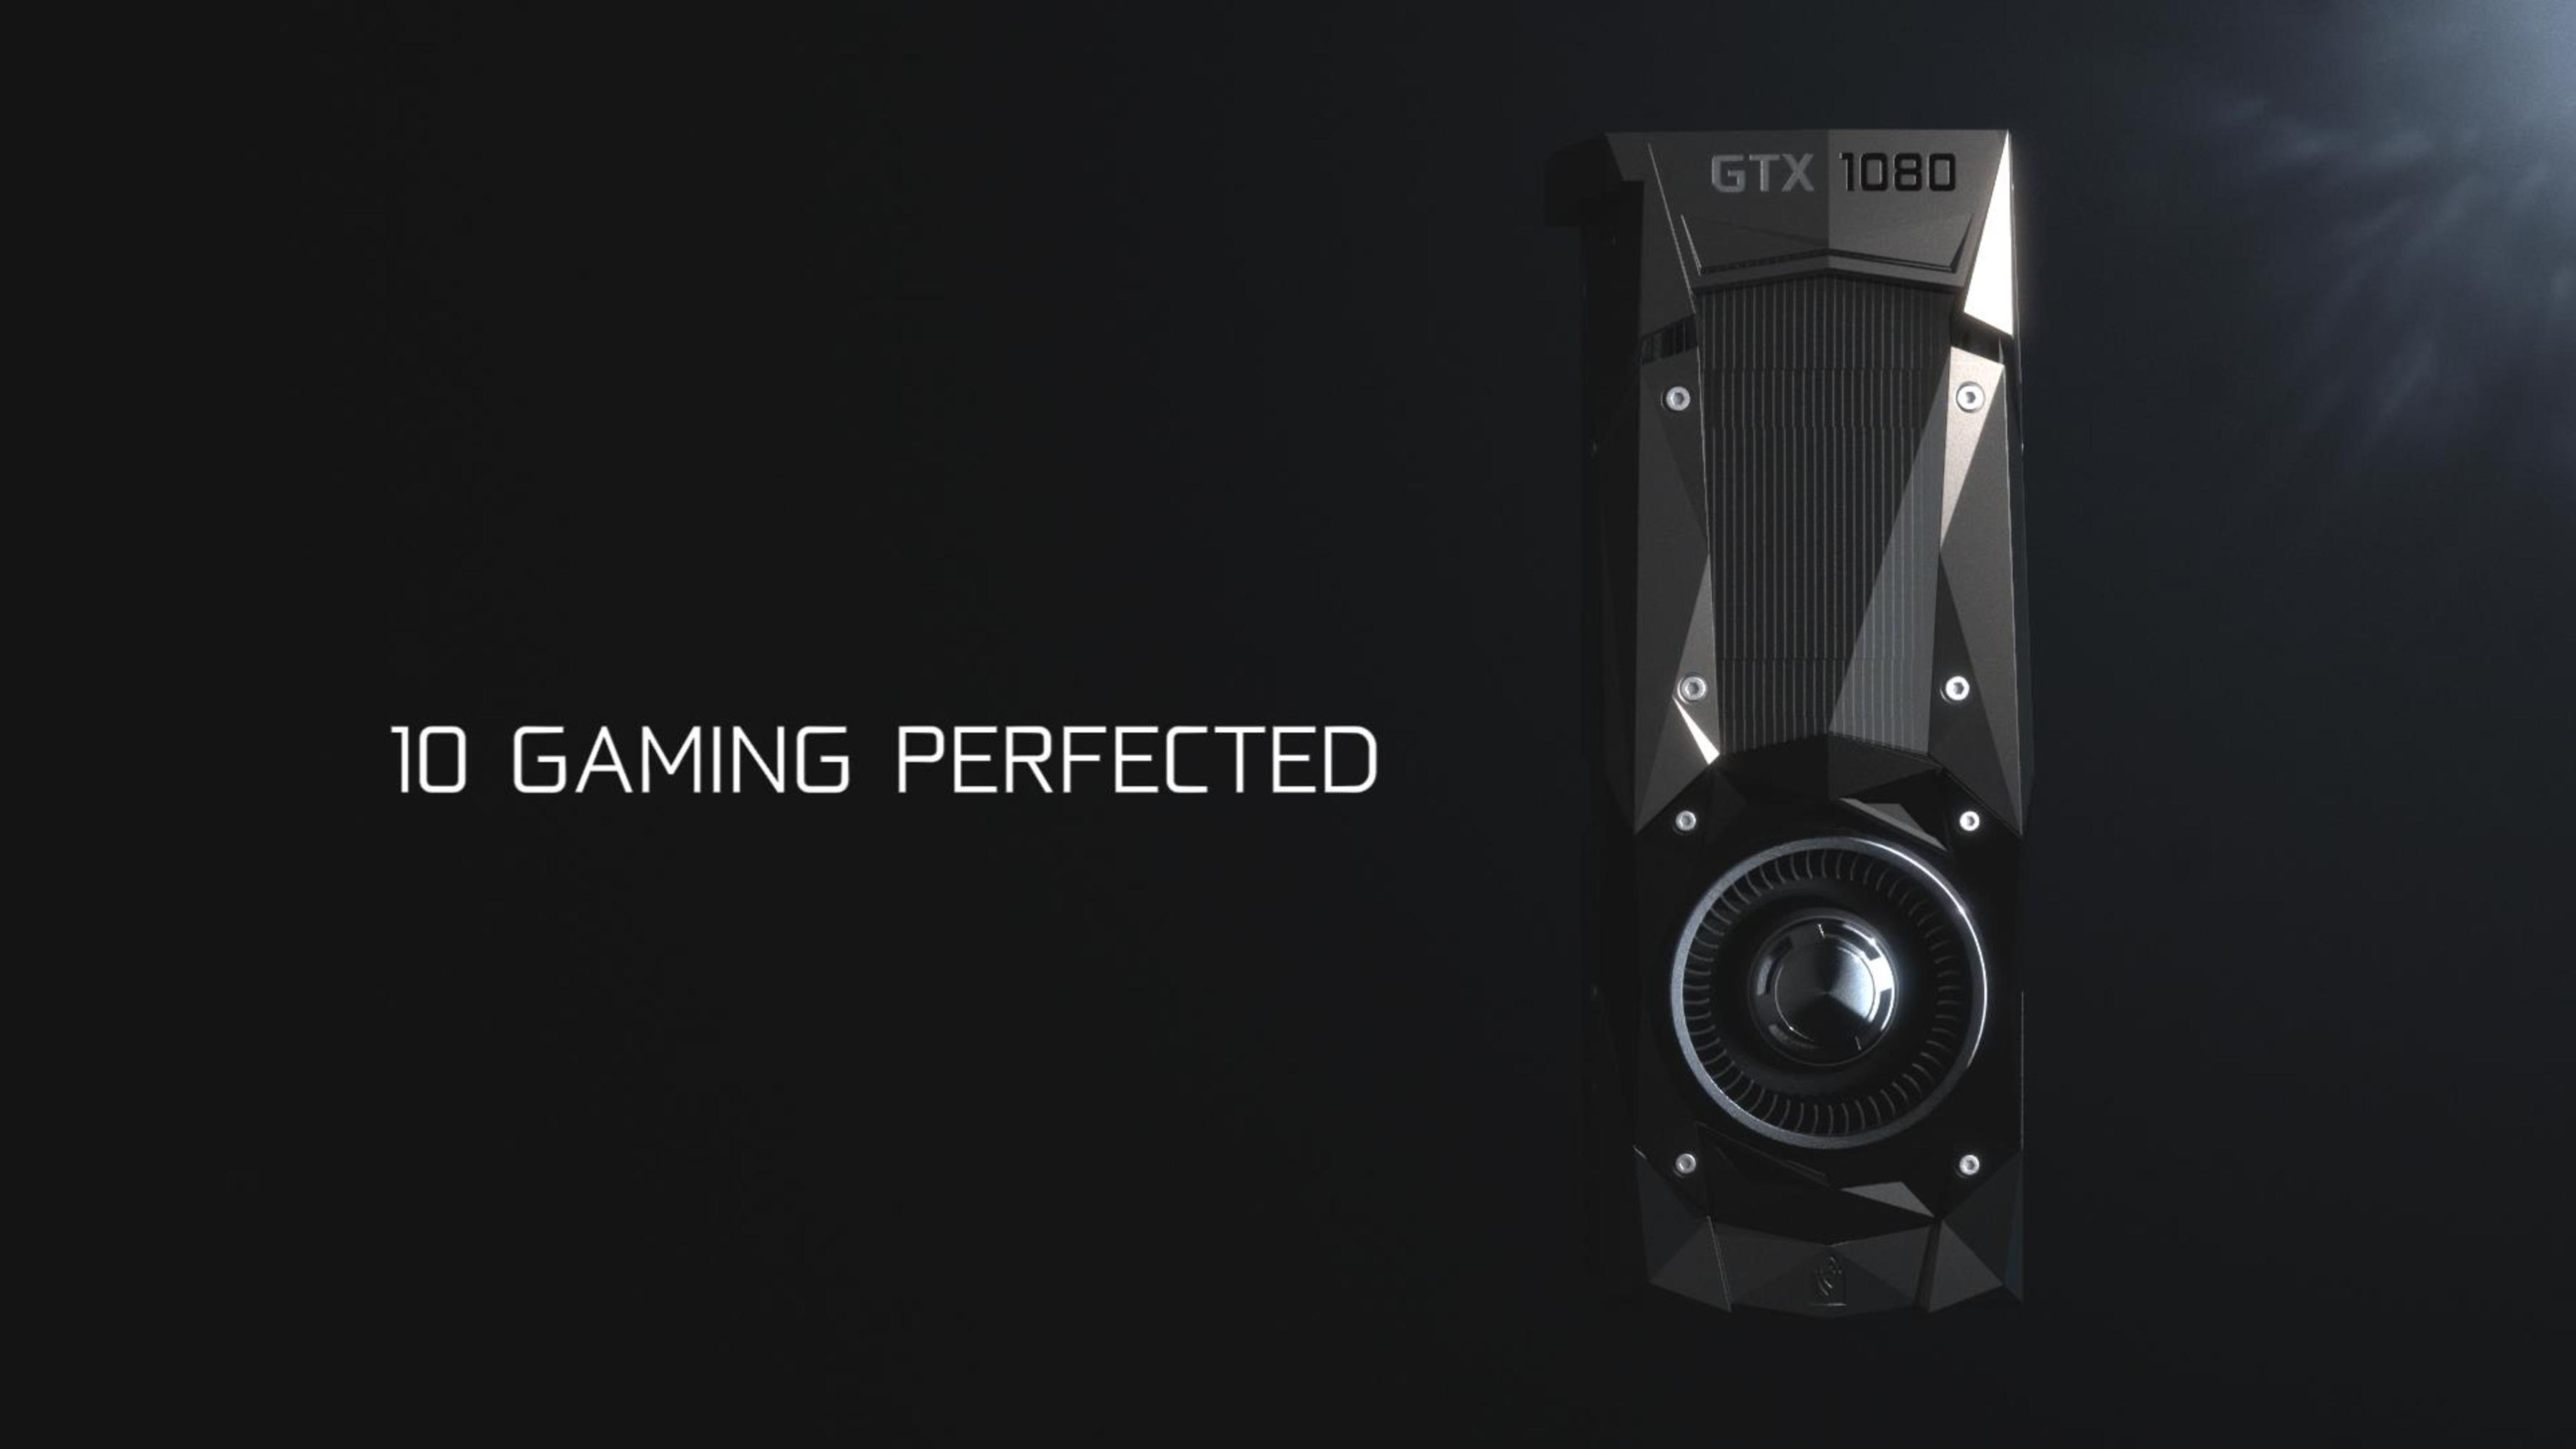 NVIDIA GeForce GTX 1080 Graphics Card Unleashed - $599 US For 8 GB GDDR5X, 2.1 GHz Overclock Speeds and Performance Faster Than Titan X and 980 SLI